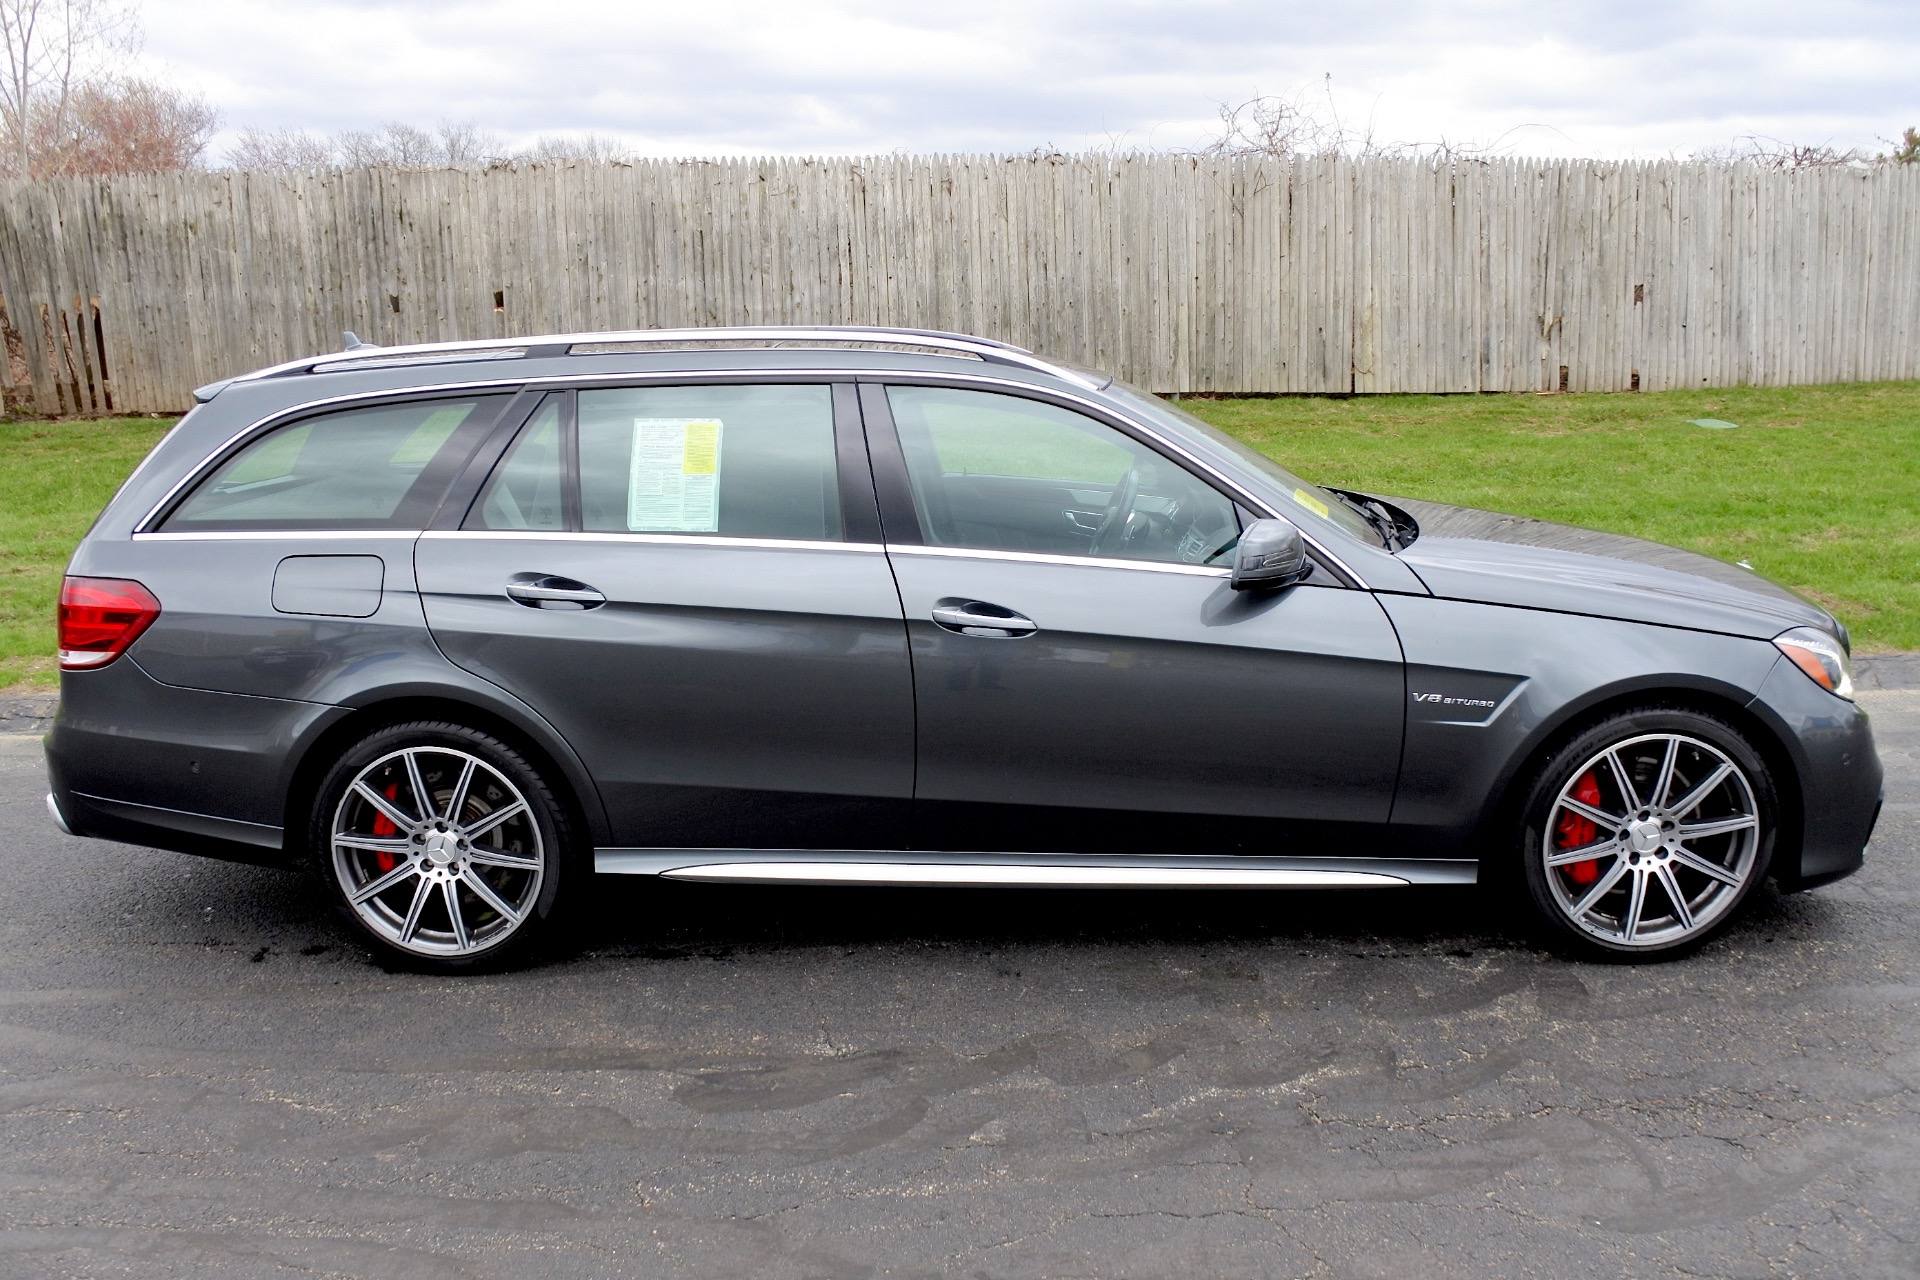 Used 2014 Mercedes-Benz E-class E63 S AMG Wagon 4MATIC For Sale ($49,950) | Metro West Motorcars ...